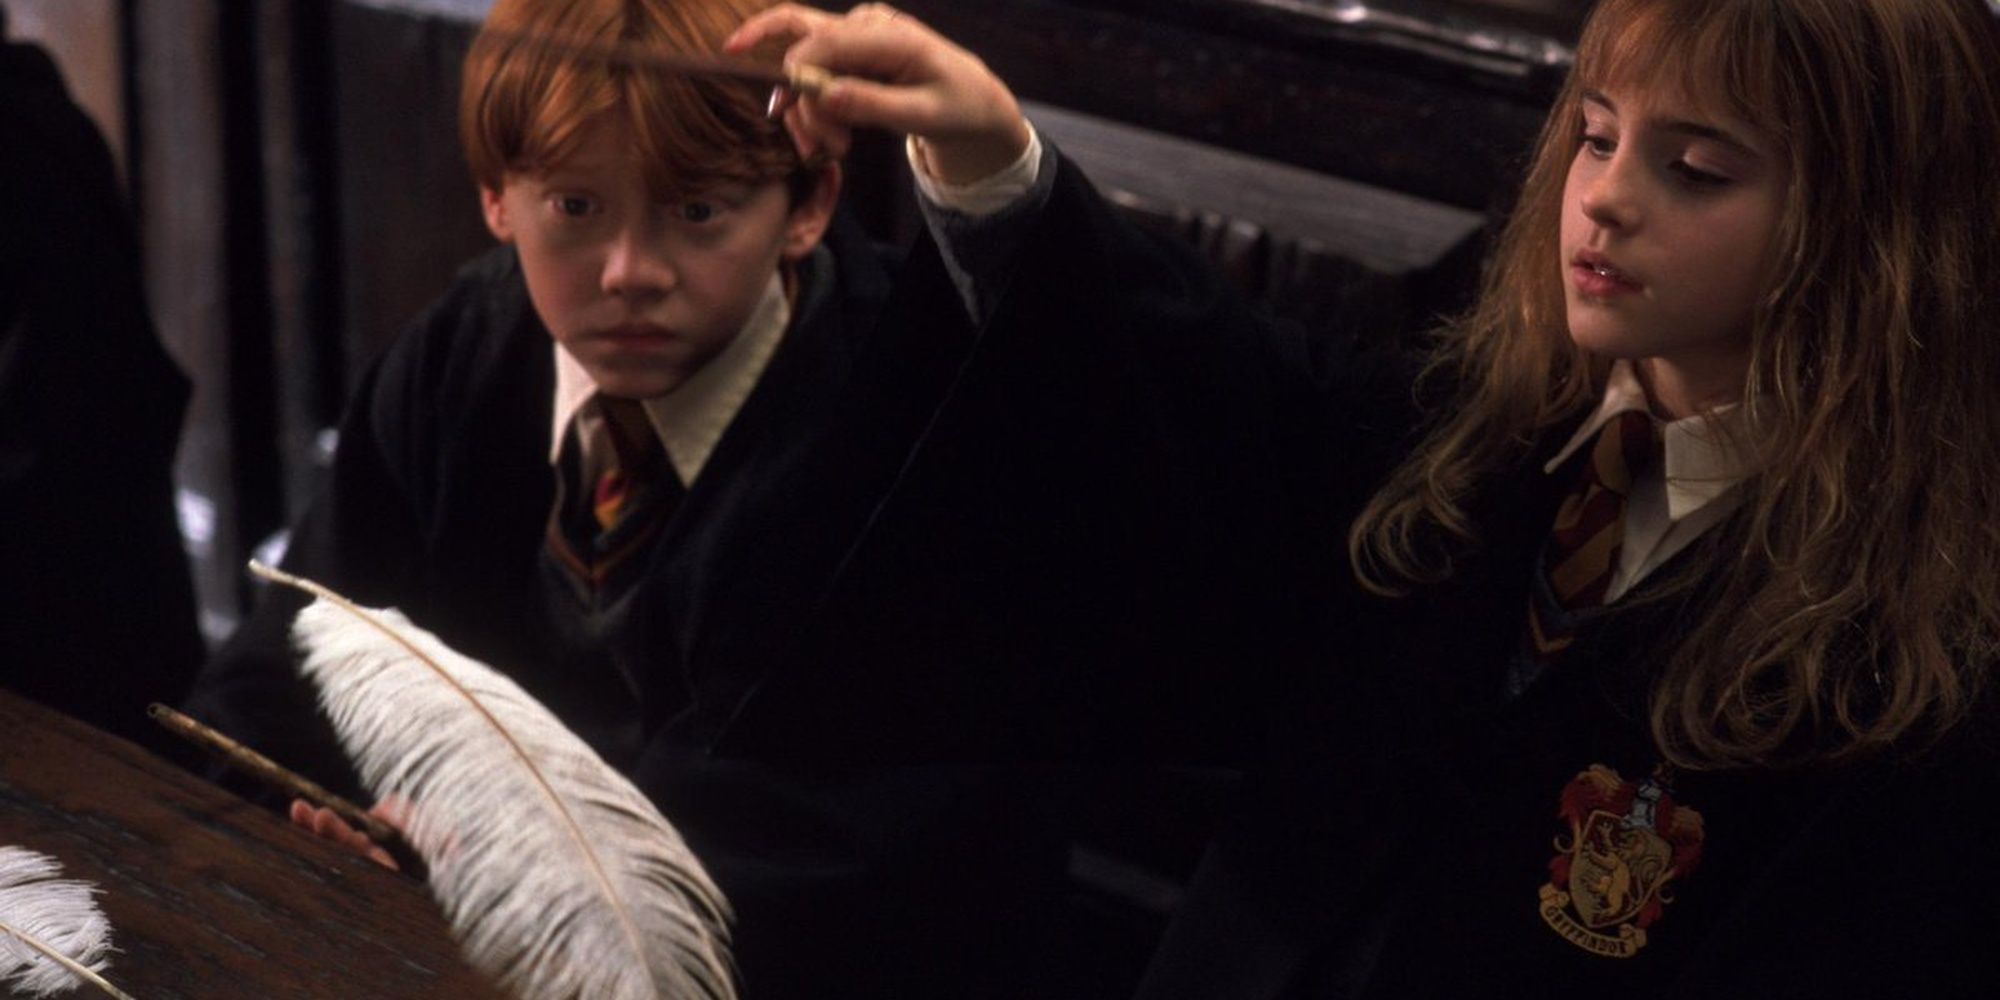 Hermione and Ron in class learning the Levitation Charm